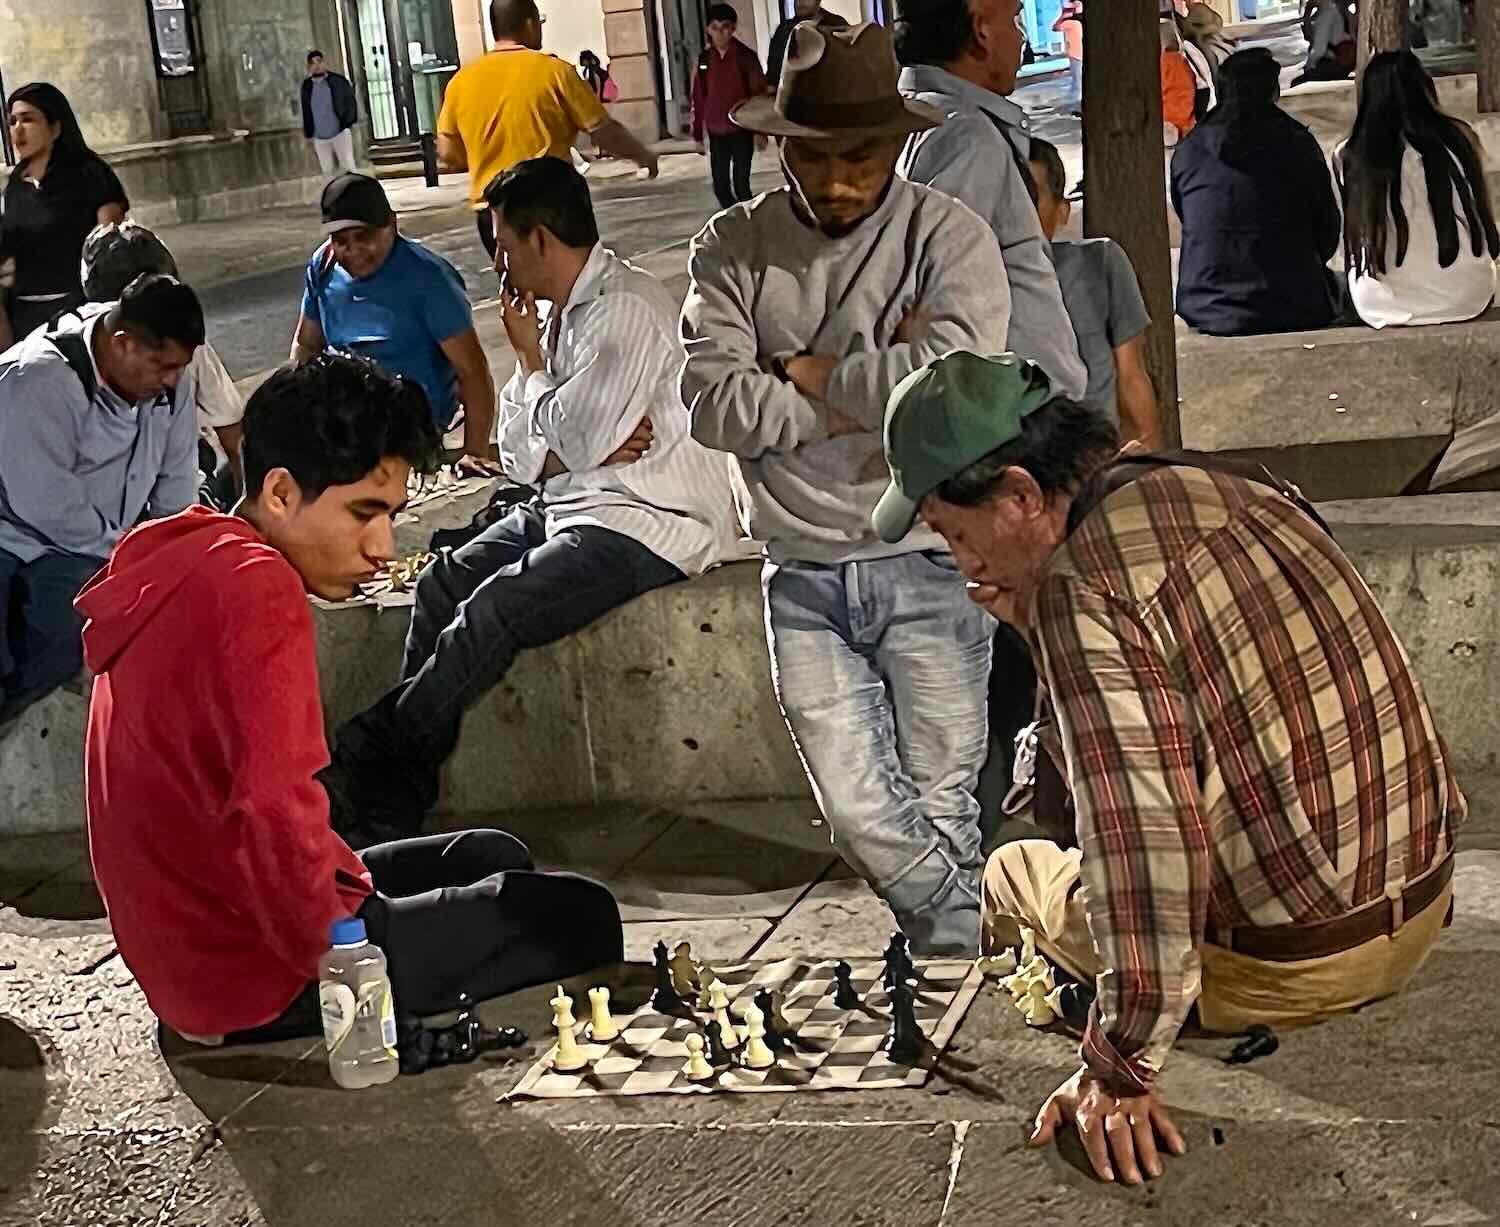 Many evenings men played chess near the central plaza